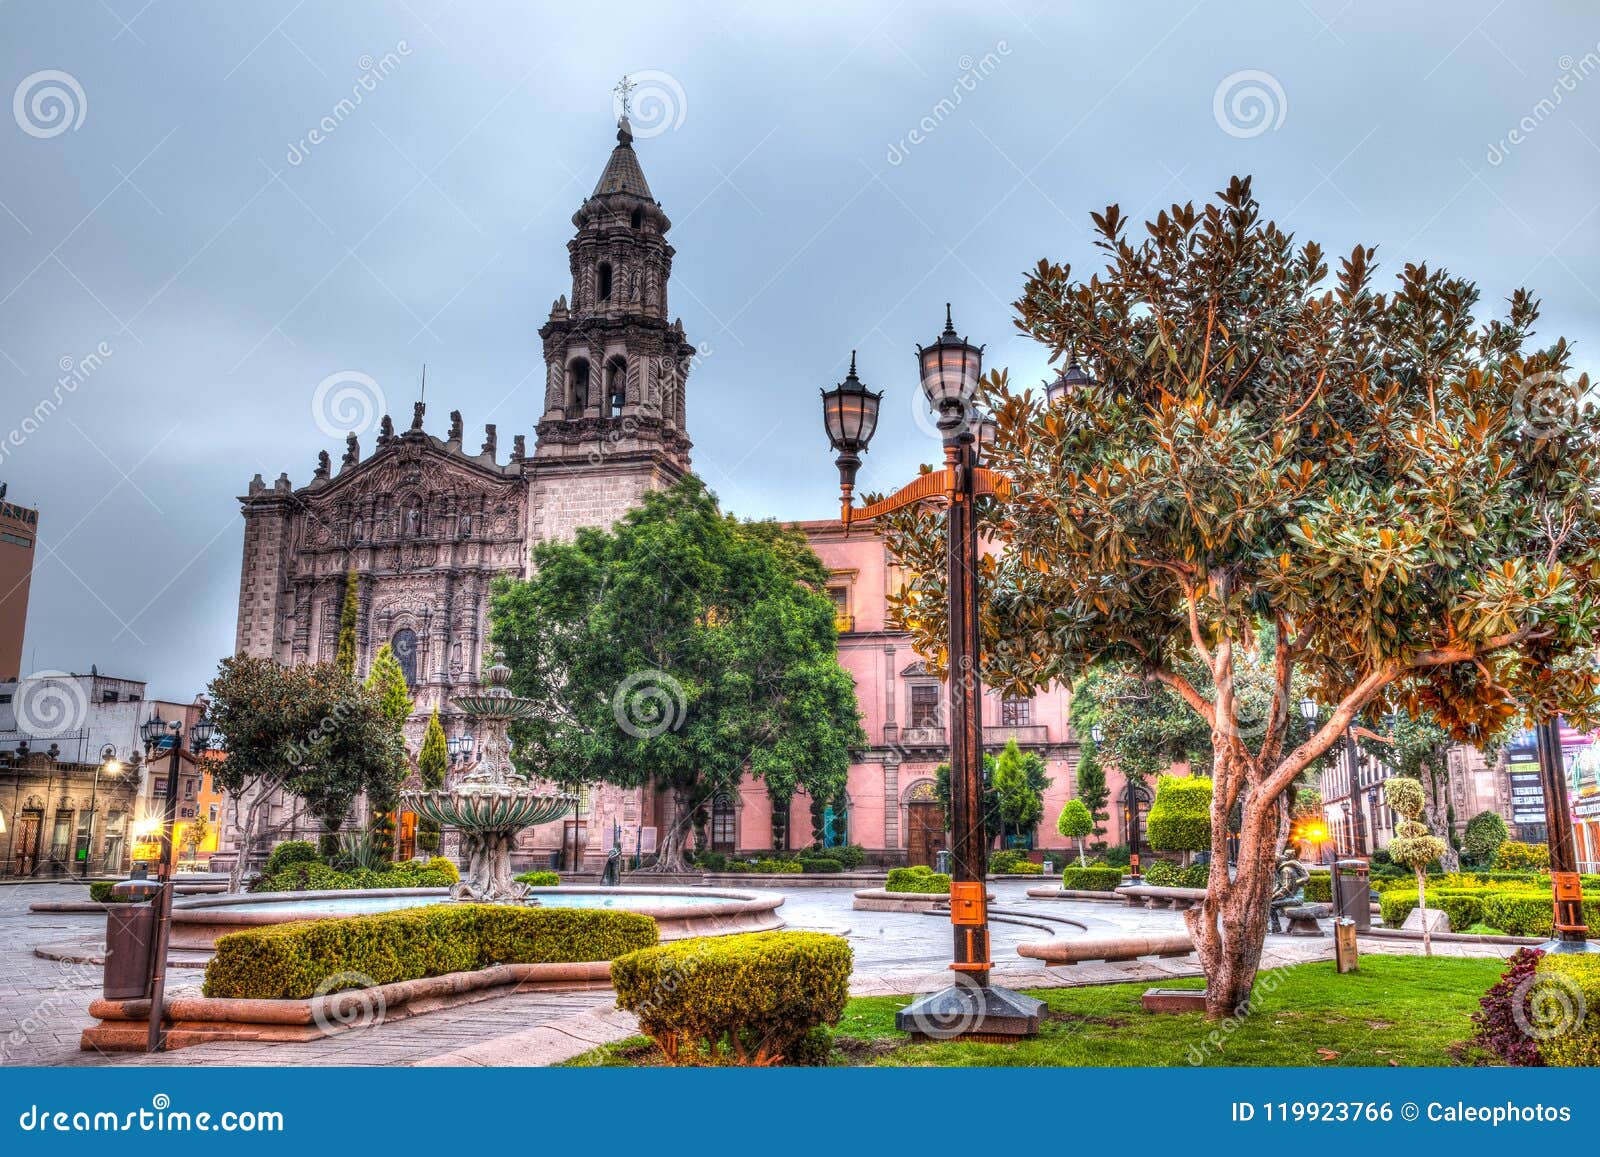 downtown plaza and streets of san luis potosi at sunrise